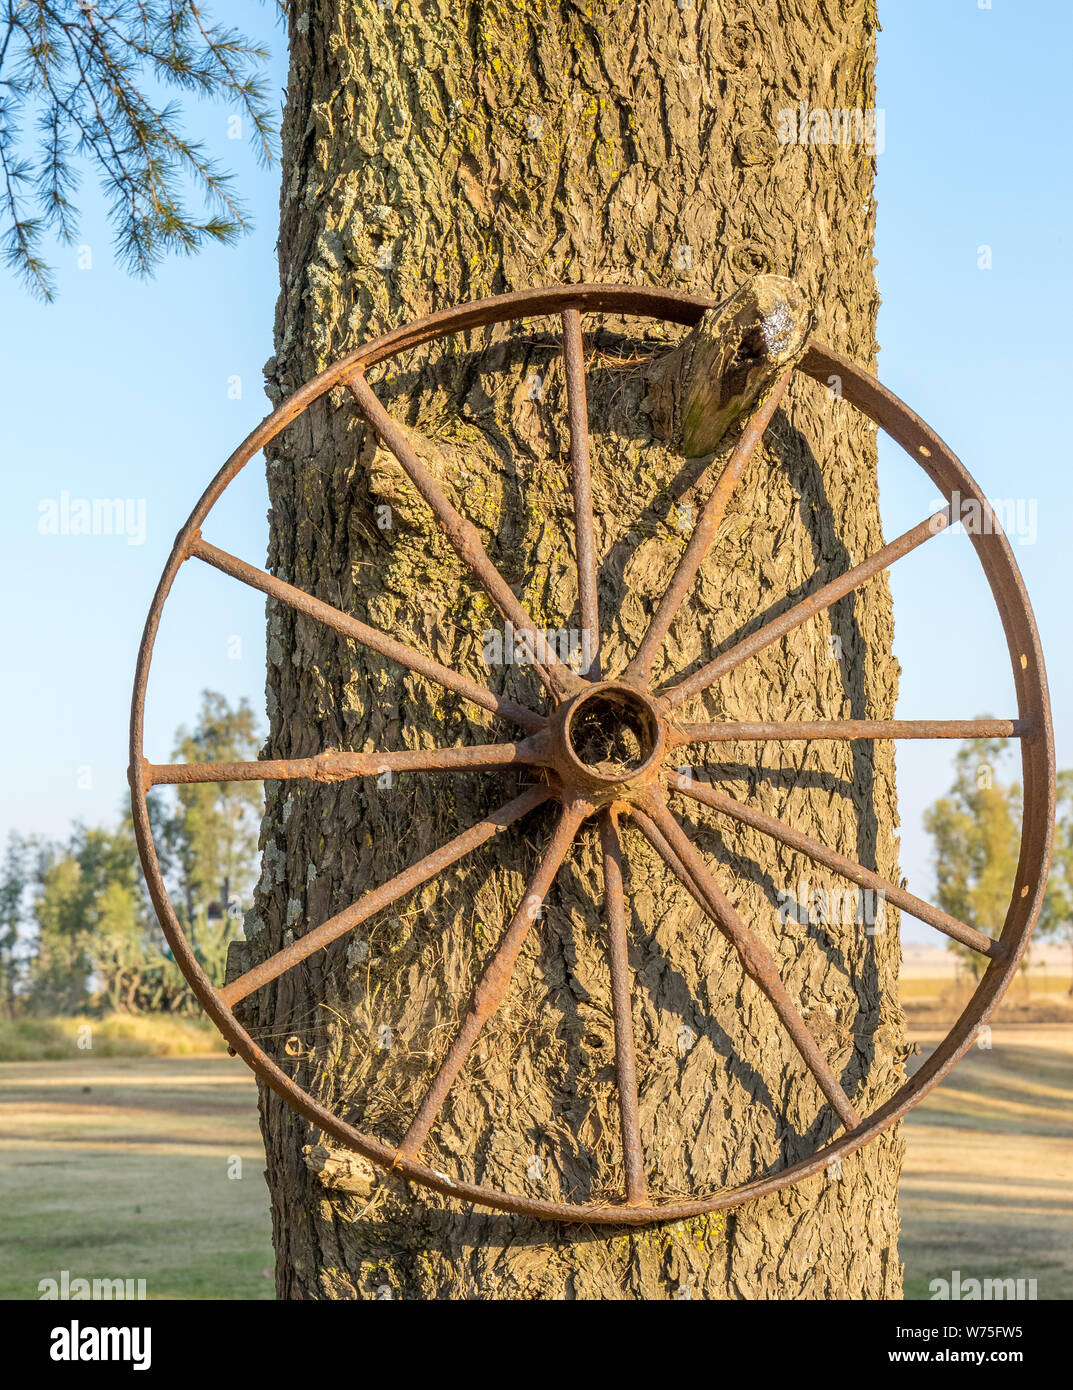 Metal rim of a vintage cart wheel hangs in a tree outside image with copy space in portrait format Stock Photo